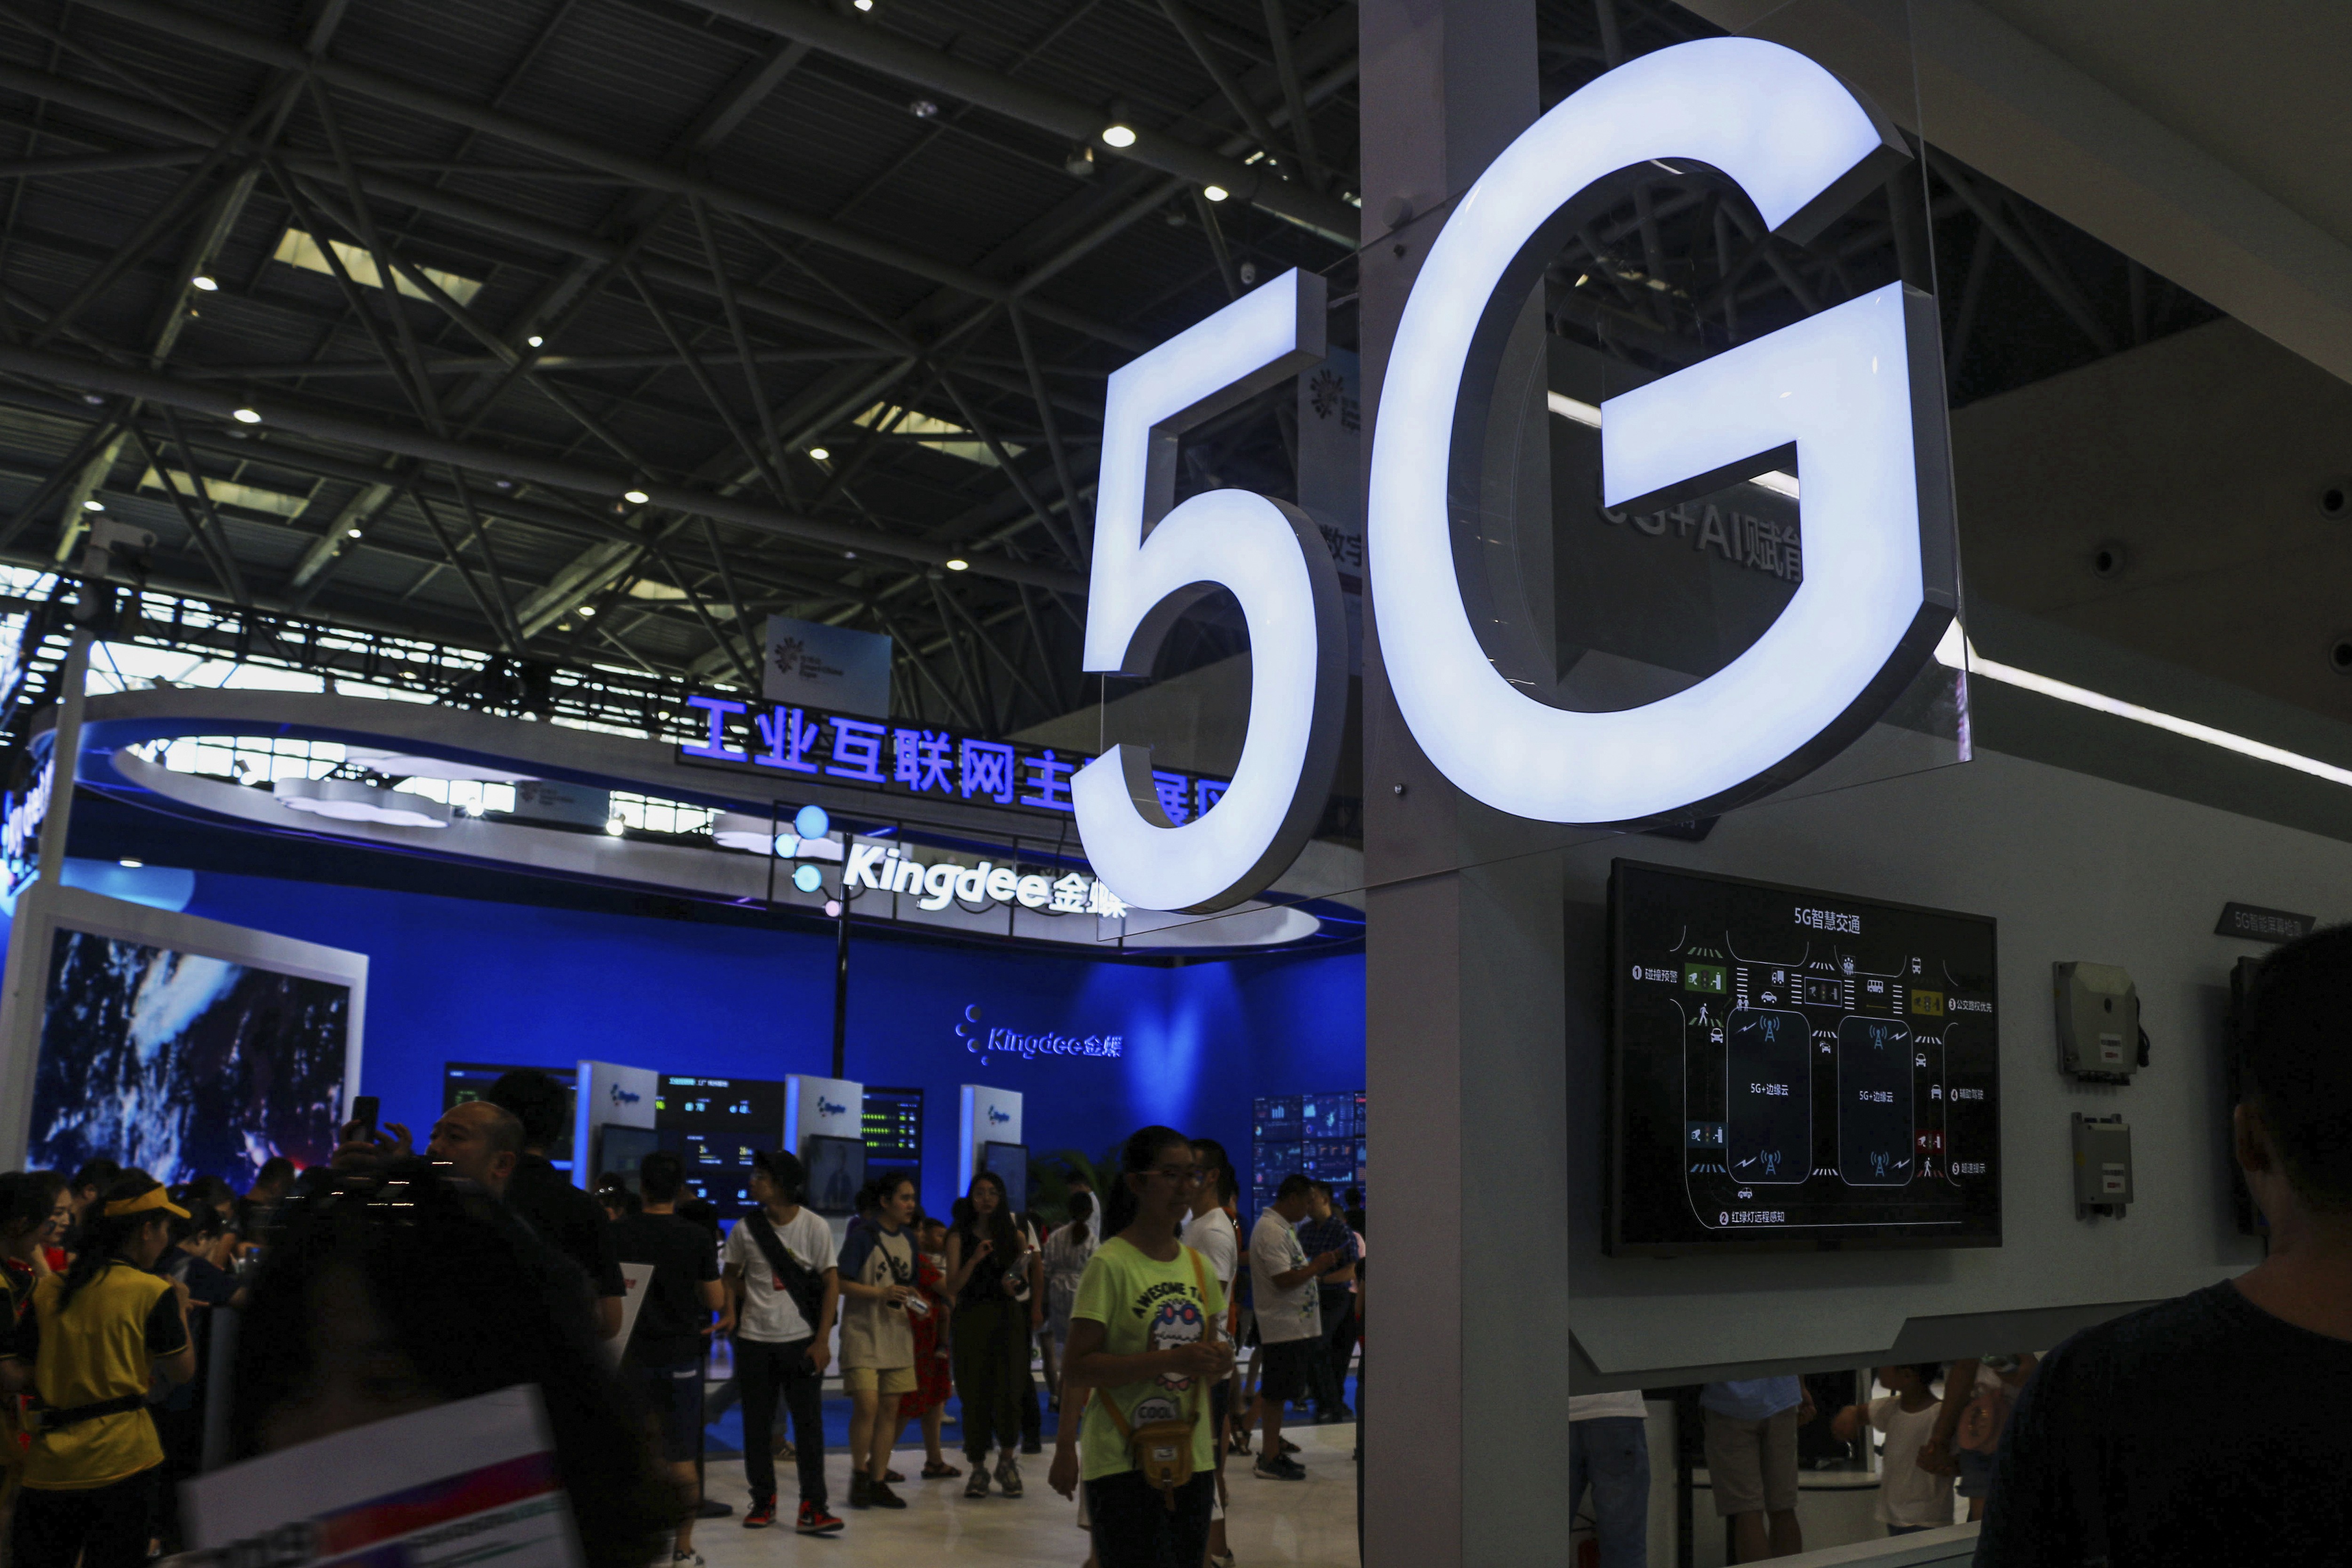 Visitors tour an exhibitor booth with a 5G on display at the Smart China Expo in southwest China's Chongqing Municipality, August 27, 2019. Photo: AP